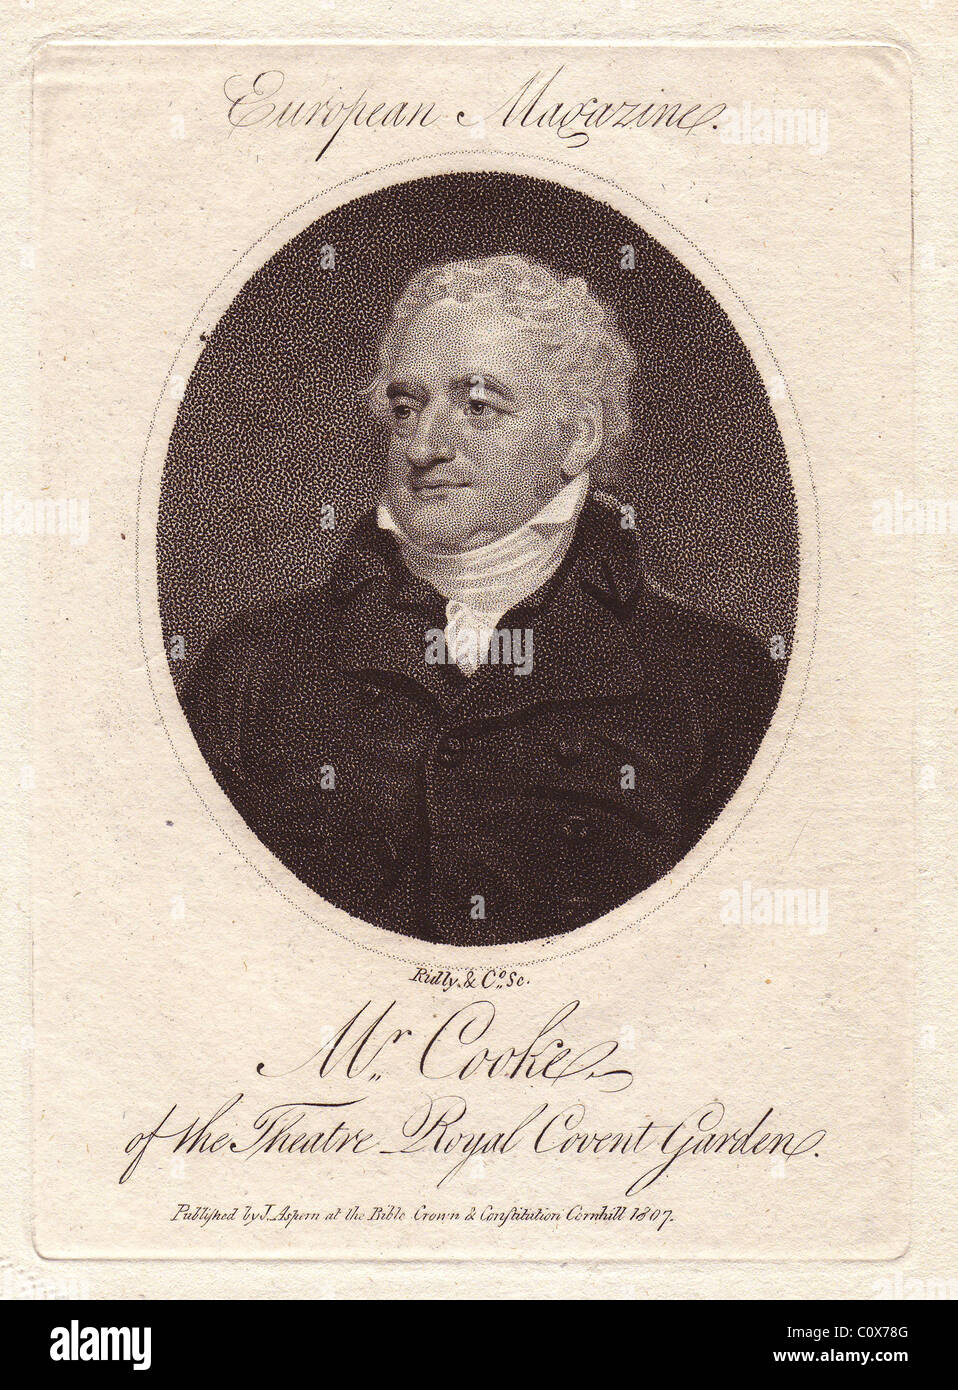 Mr. George Frederick Cooke (1756-1812), of the Theatre Royal Covent Garden. Stock Photo